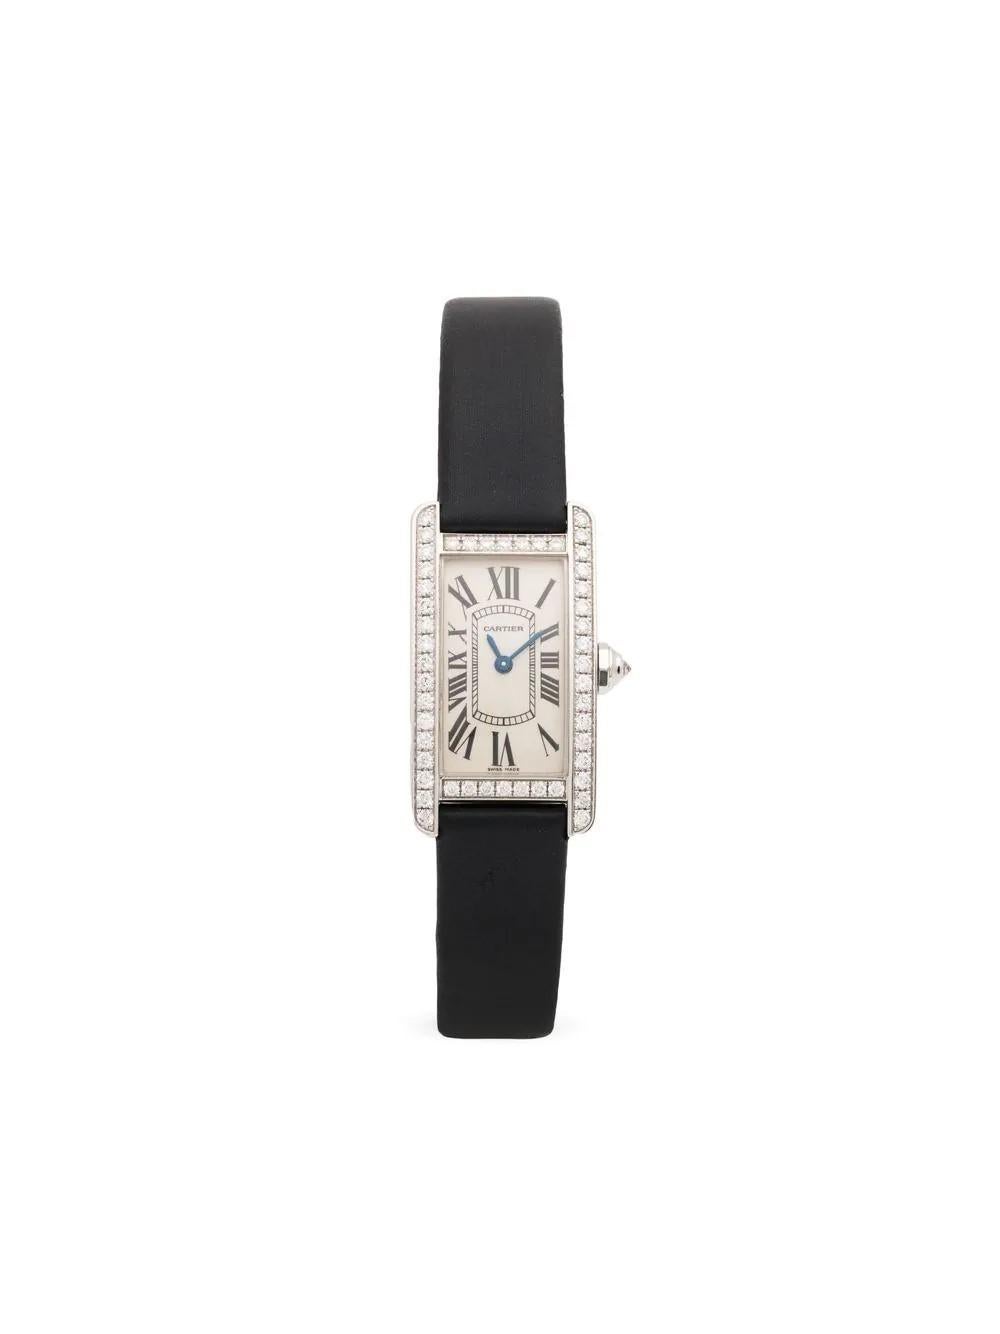 The Tank Américaine watch was first launched in 1989. This is a small model with quartz movement. The case is in a white gold set with brilliant cut diamonds and a faceted crown also set with a brilliant cut diamond. This model also includes a